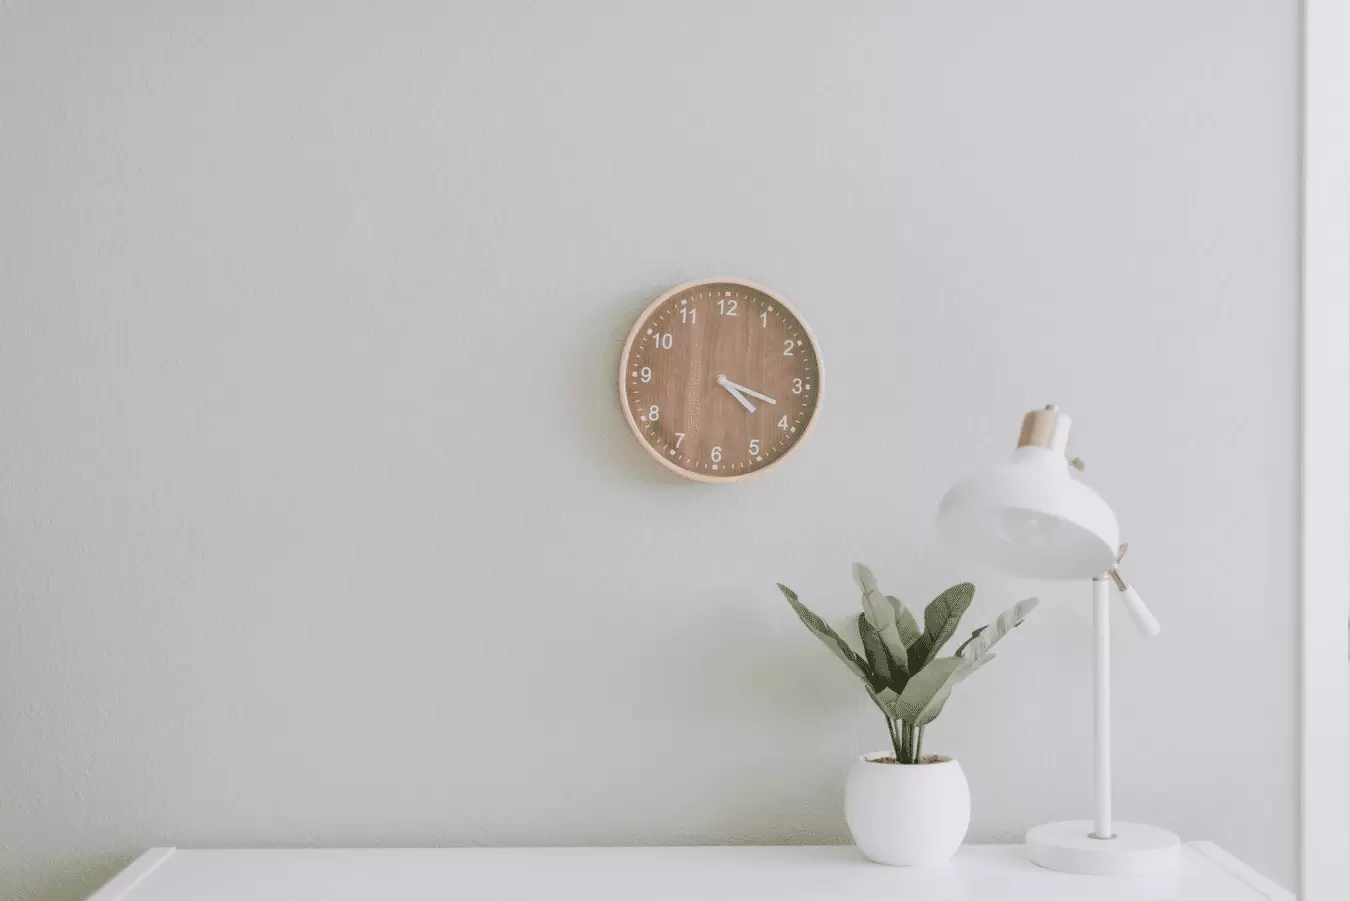 plain wall with clock and plant on desk